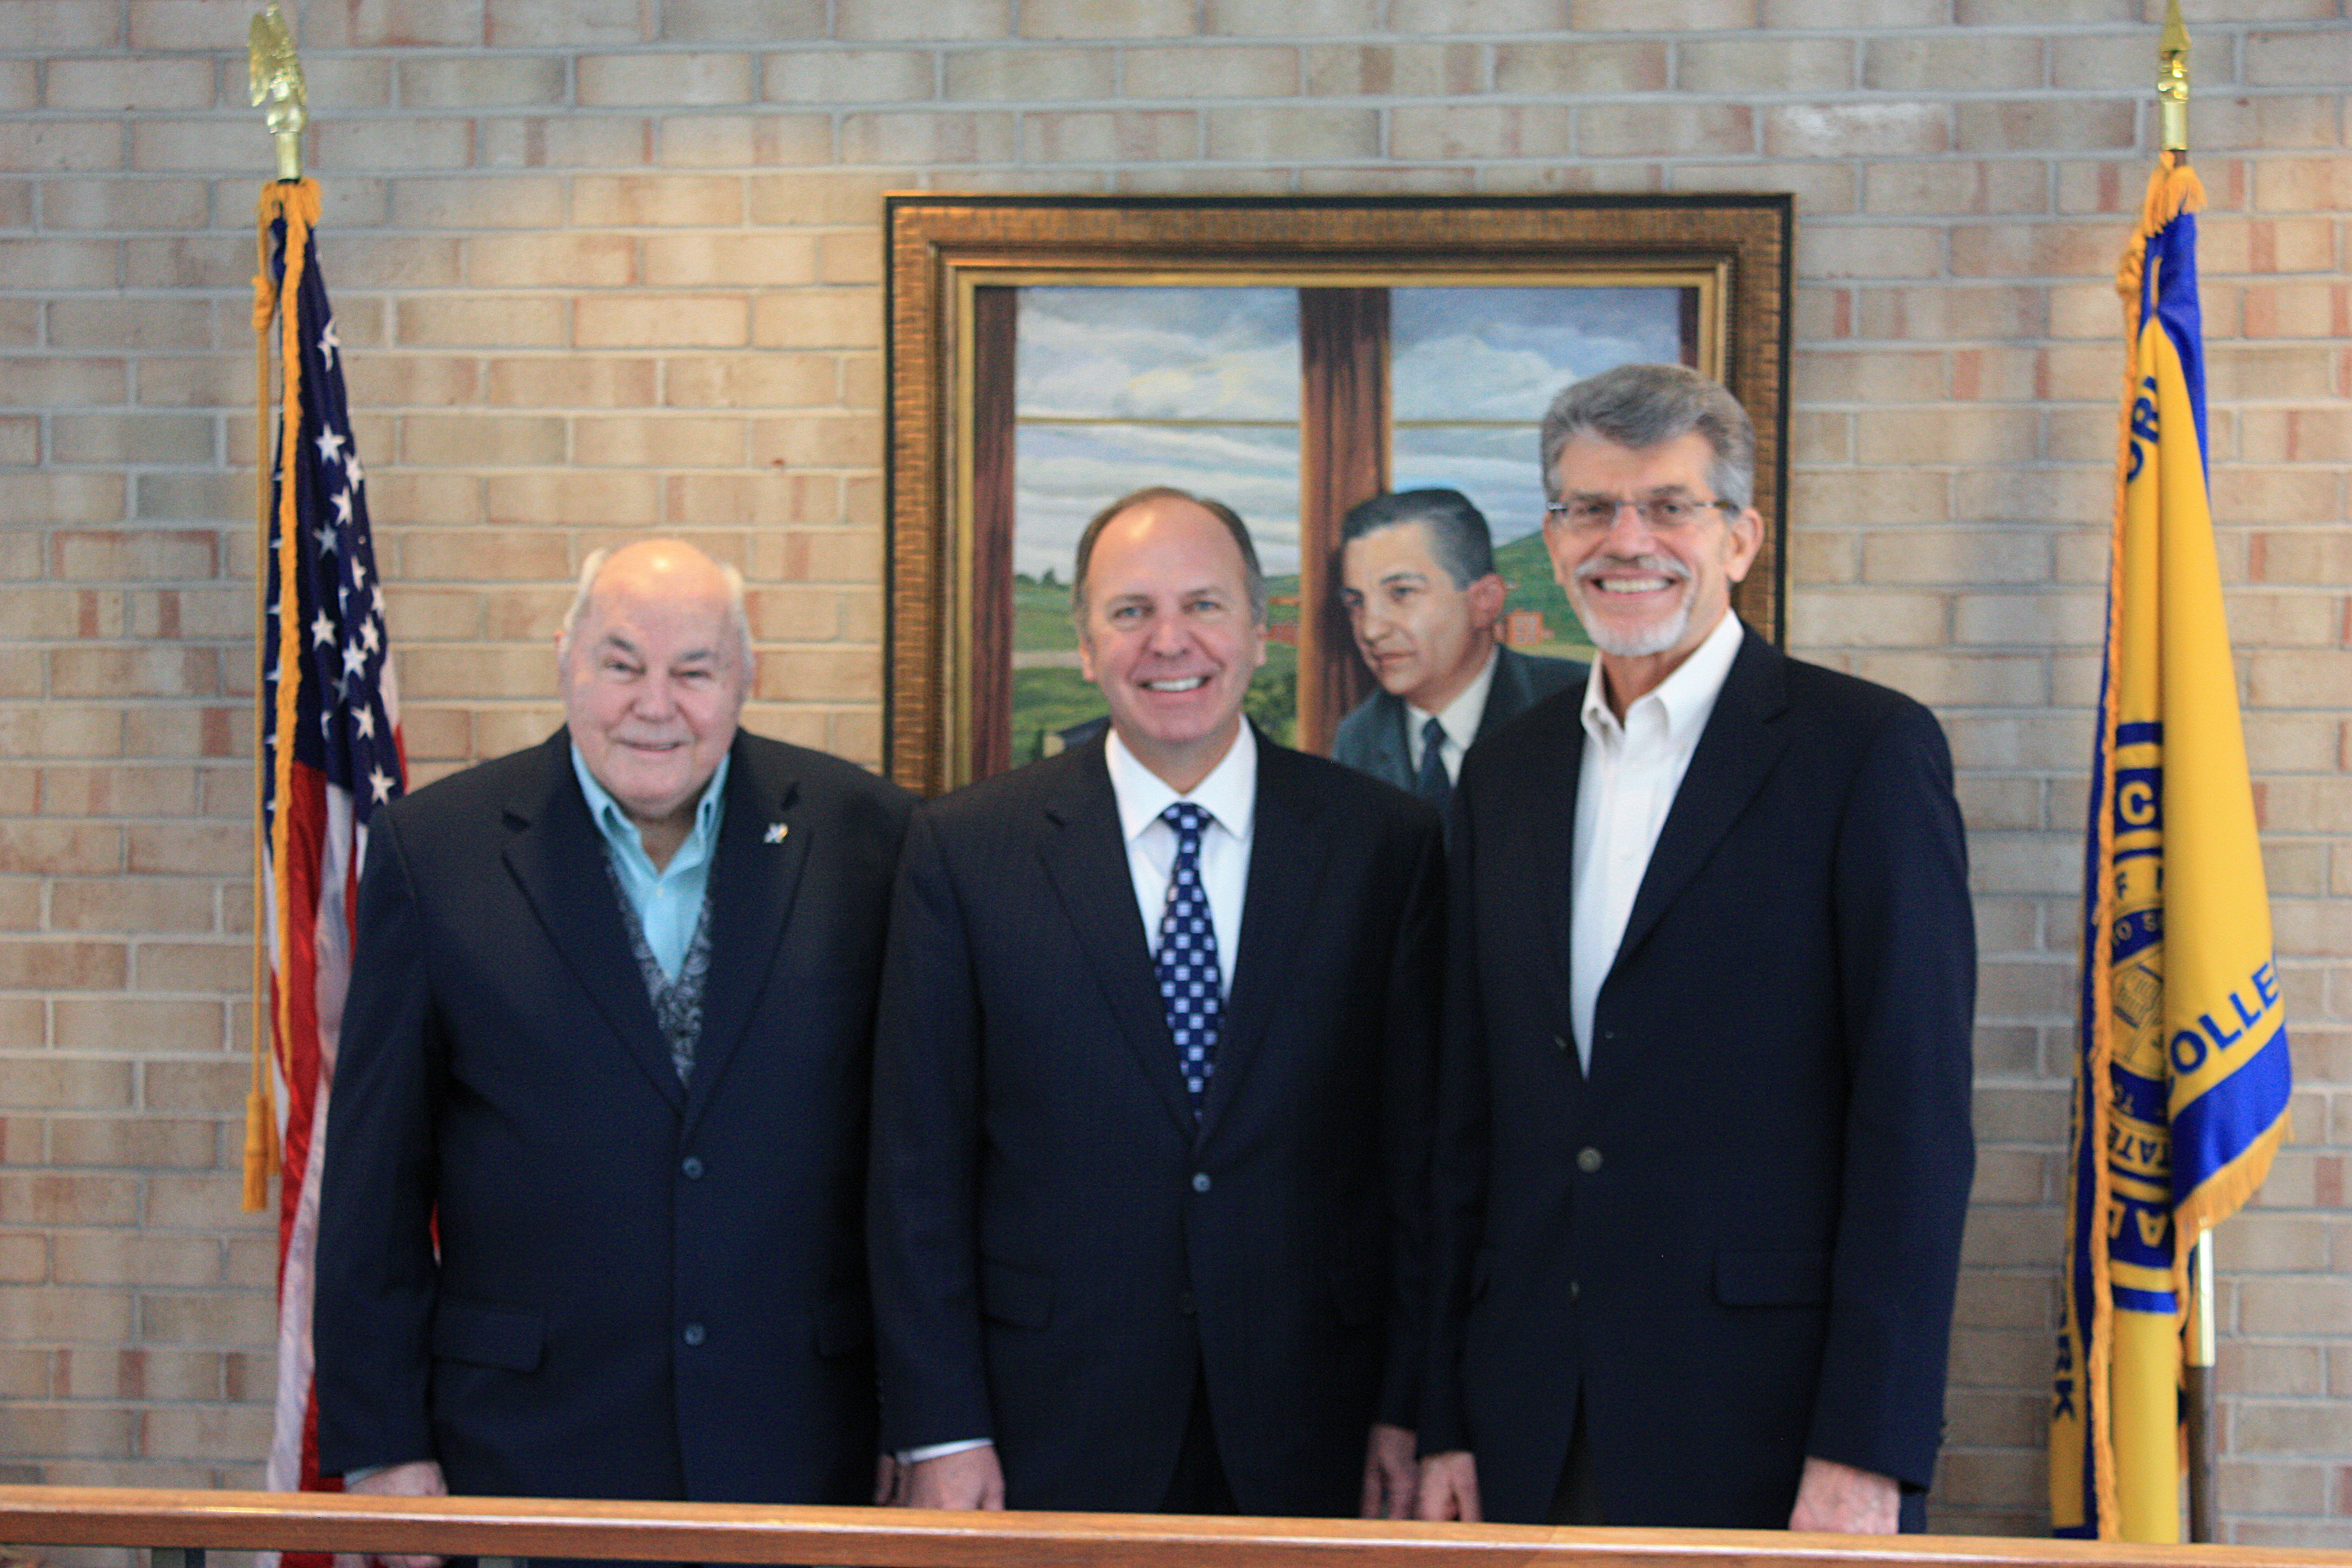 Dr. Hunter with past Alfred State Presidents Dr. John Anderson, and Dr. William Rezak from 2013.